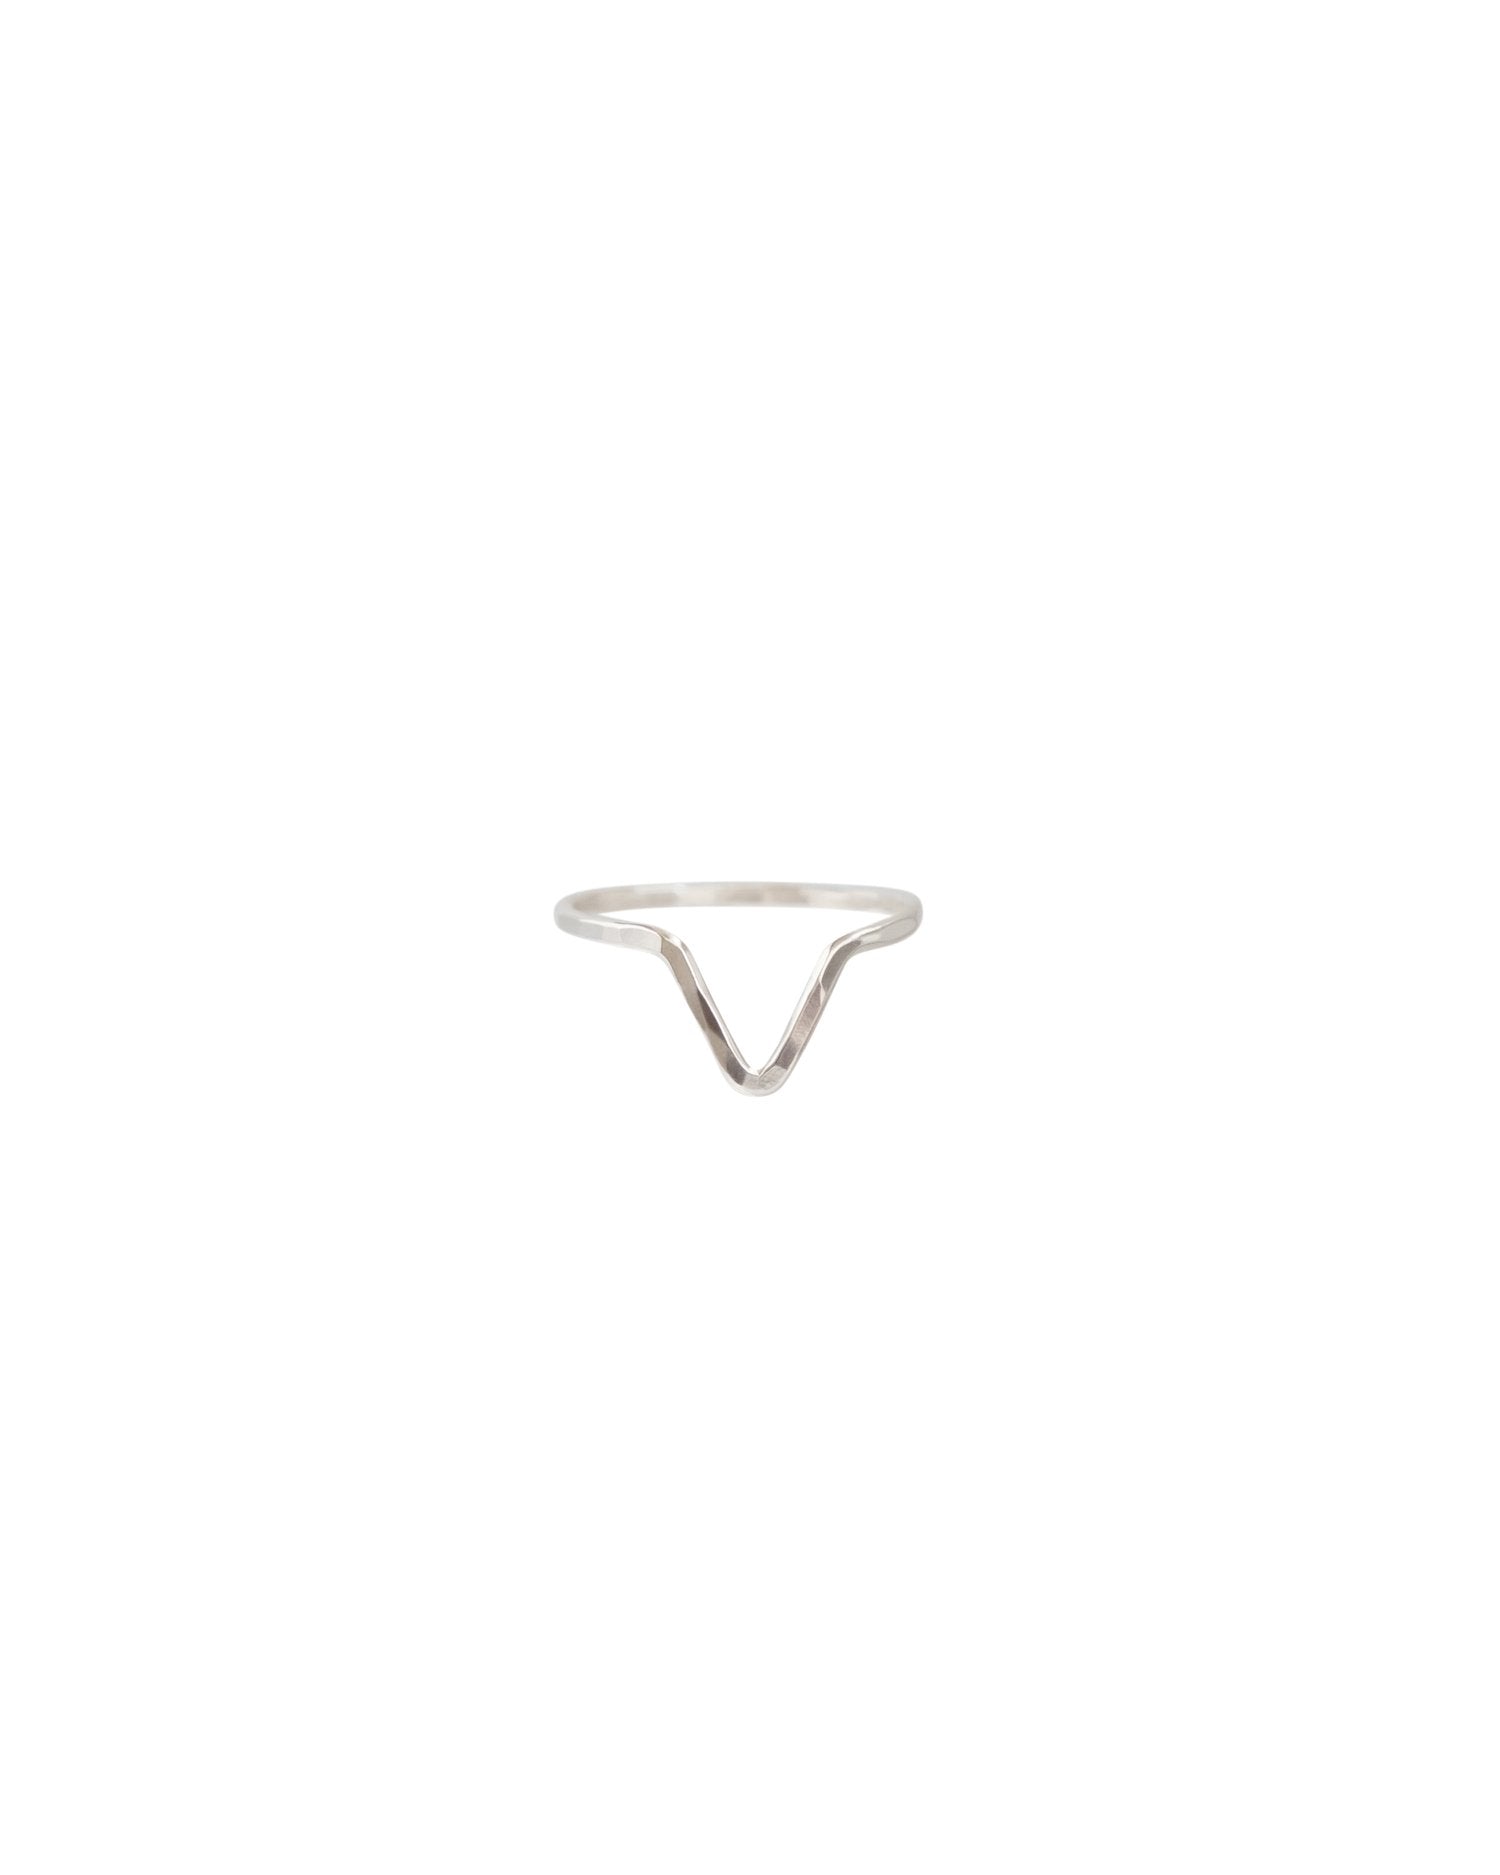 SUN & SELENE handcrafted NIKE stacking ring in silver 